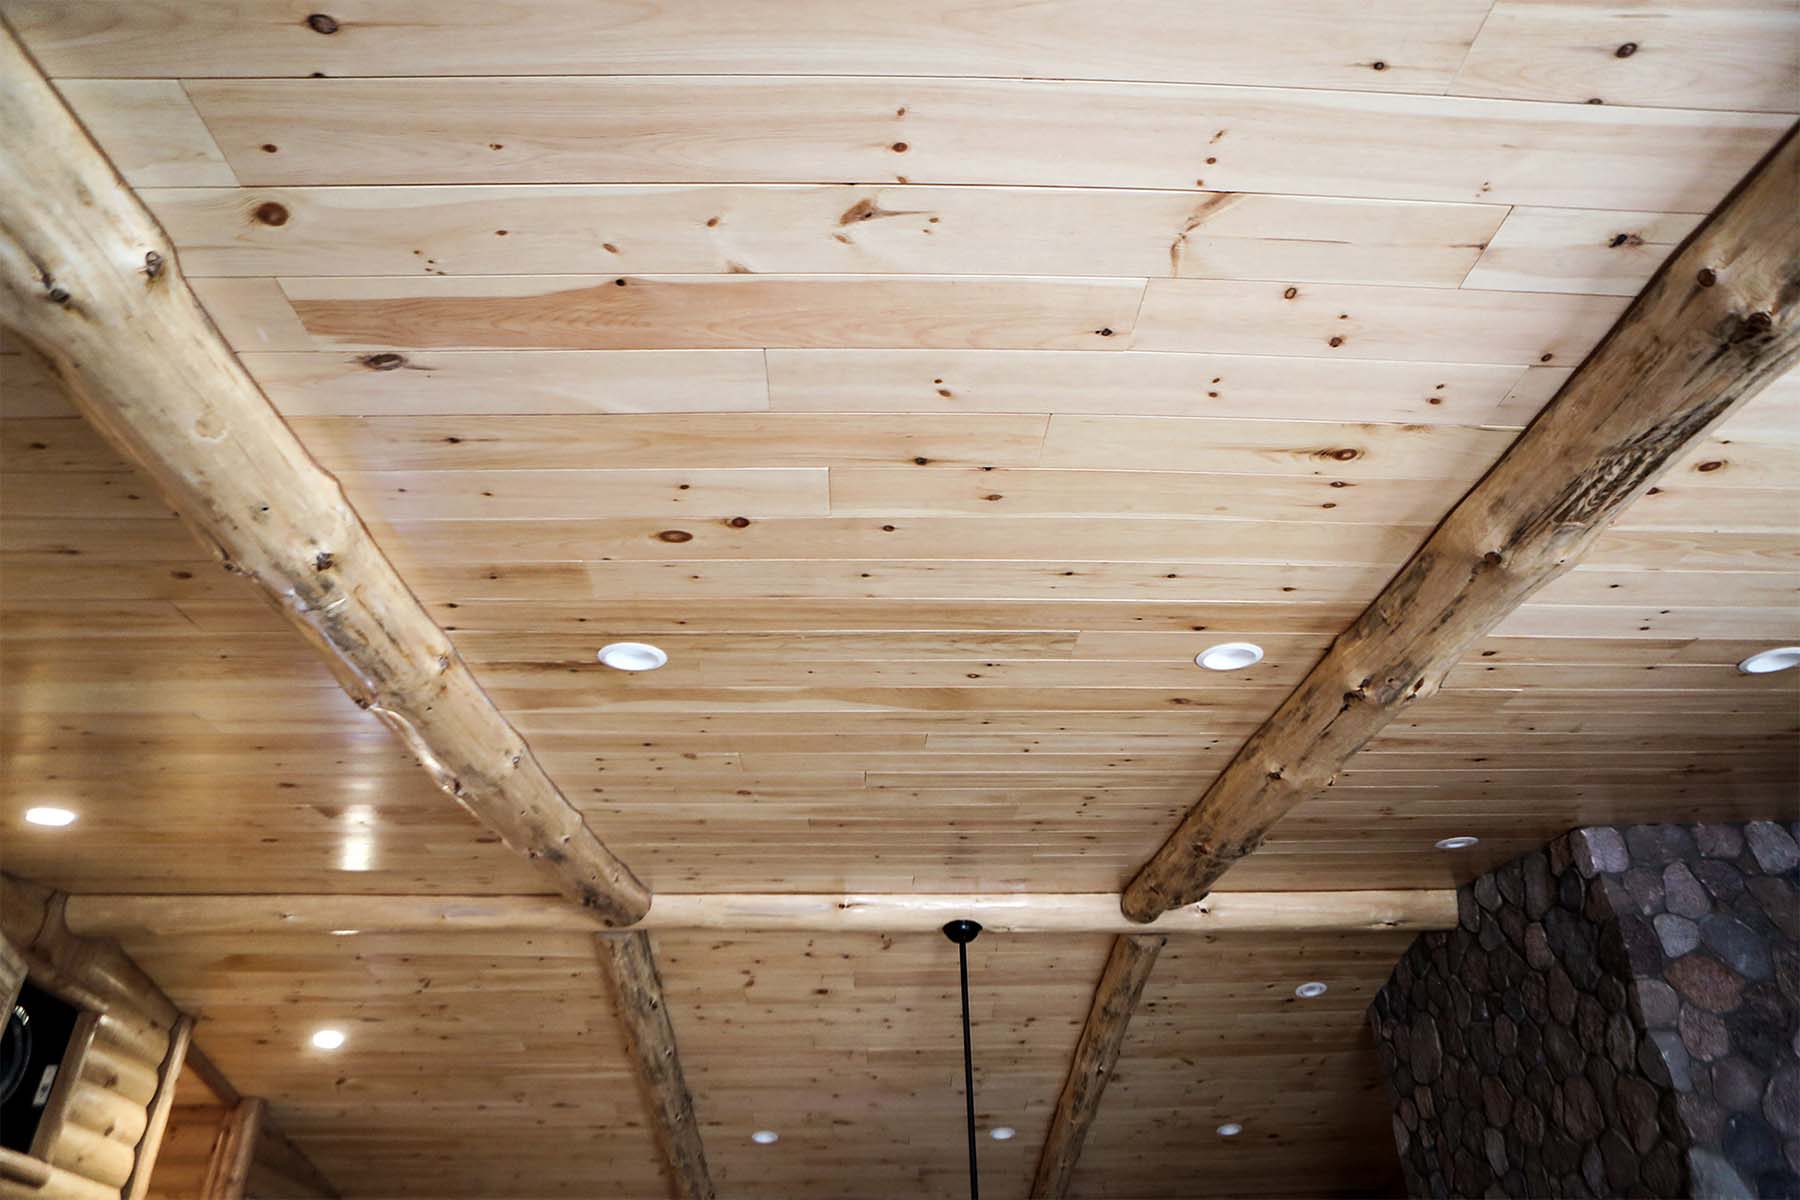 Knotty Pine Ceiling Installation Cape Town South Africa